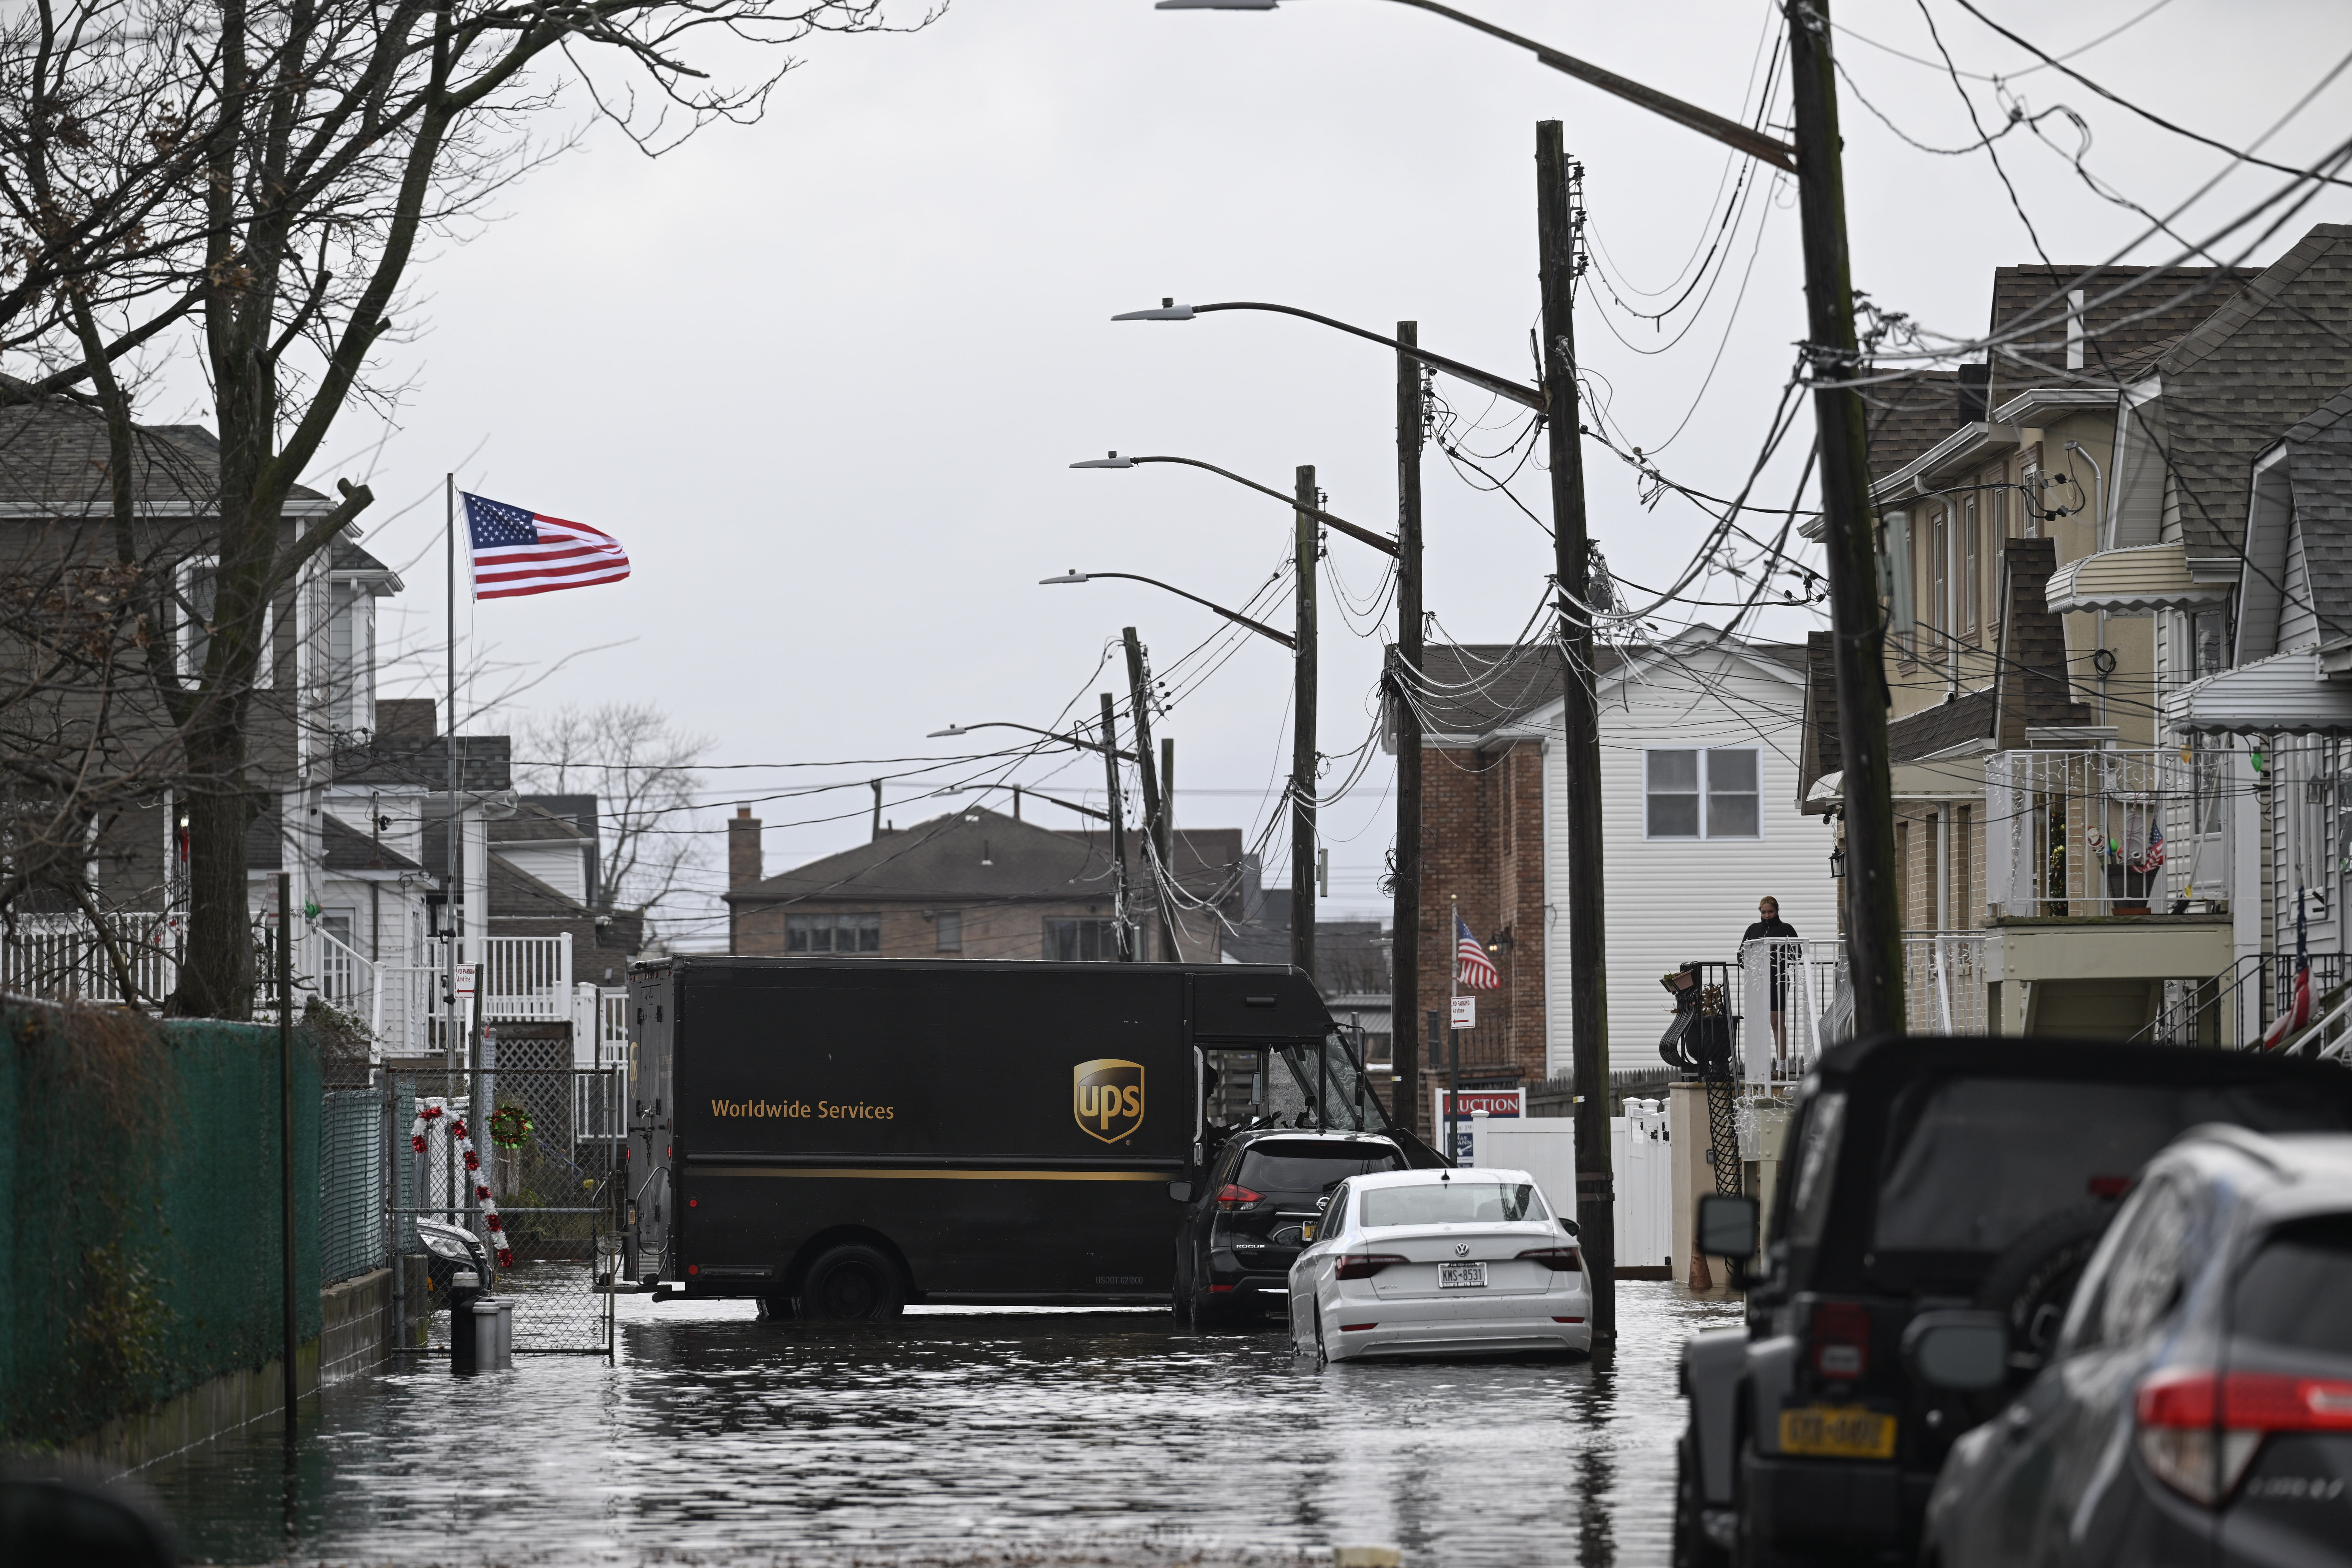 Major residential area is seen flooded during winter storm in Howard Beach, Queens, New York, United States on December 23, 2022.